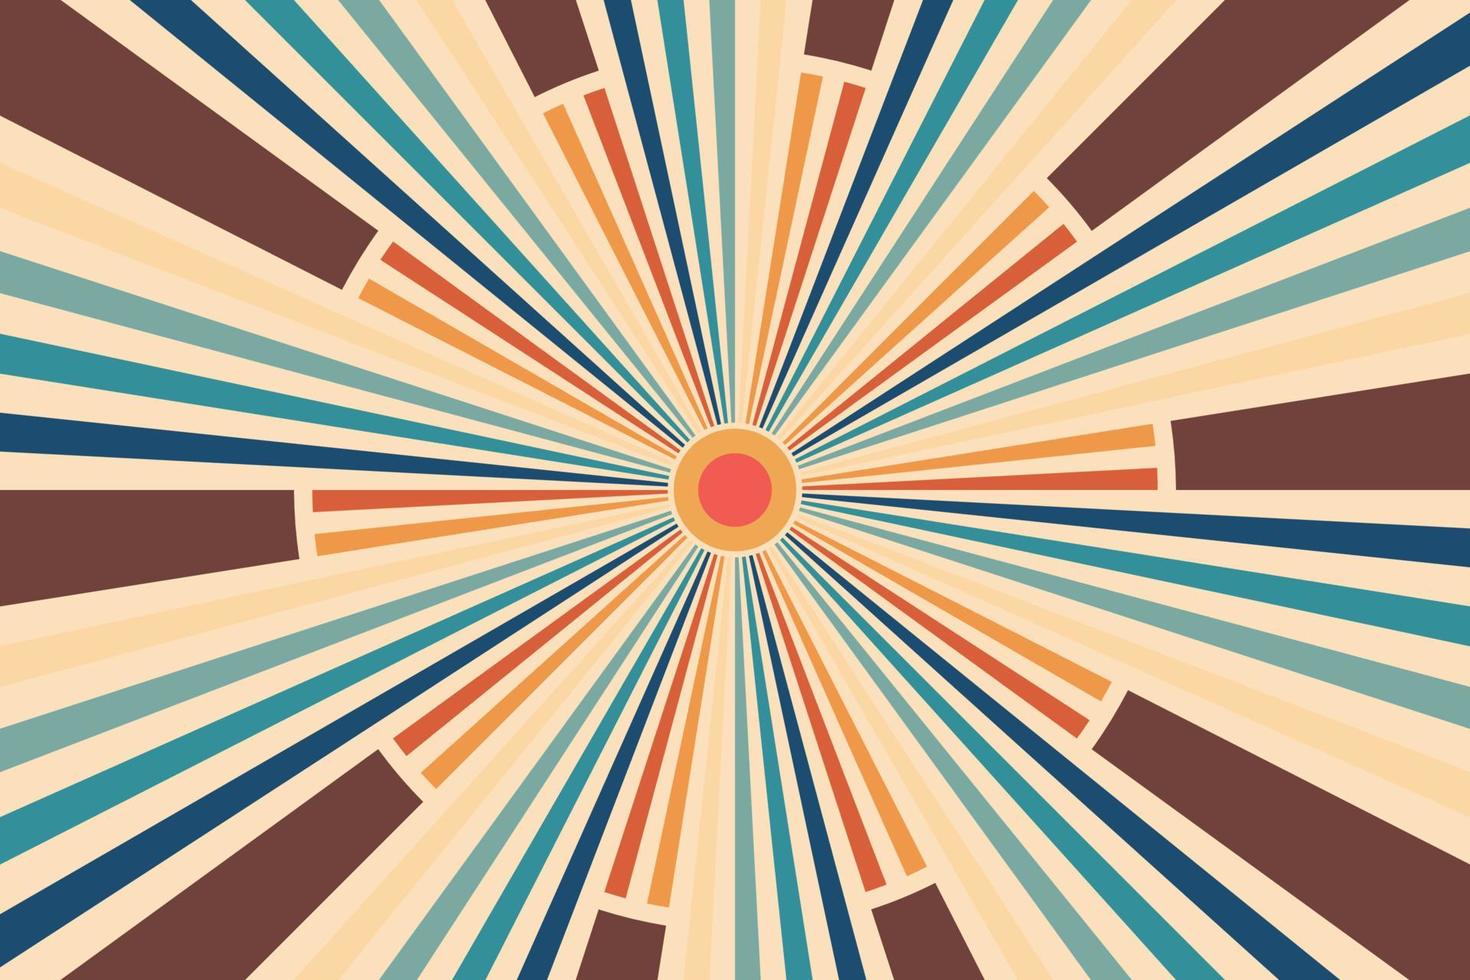 abstract zonnestraal zon straal retro achtergrond vector